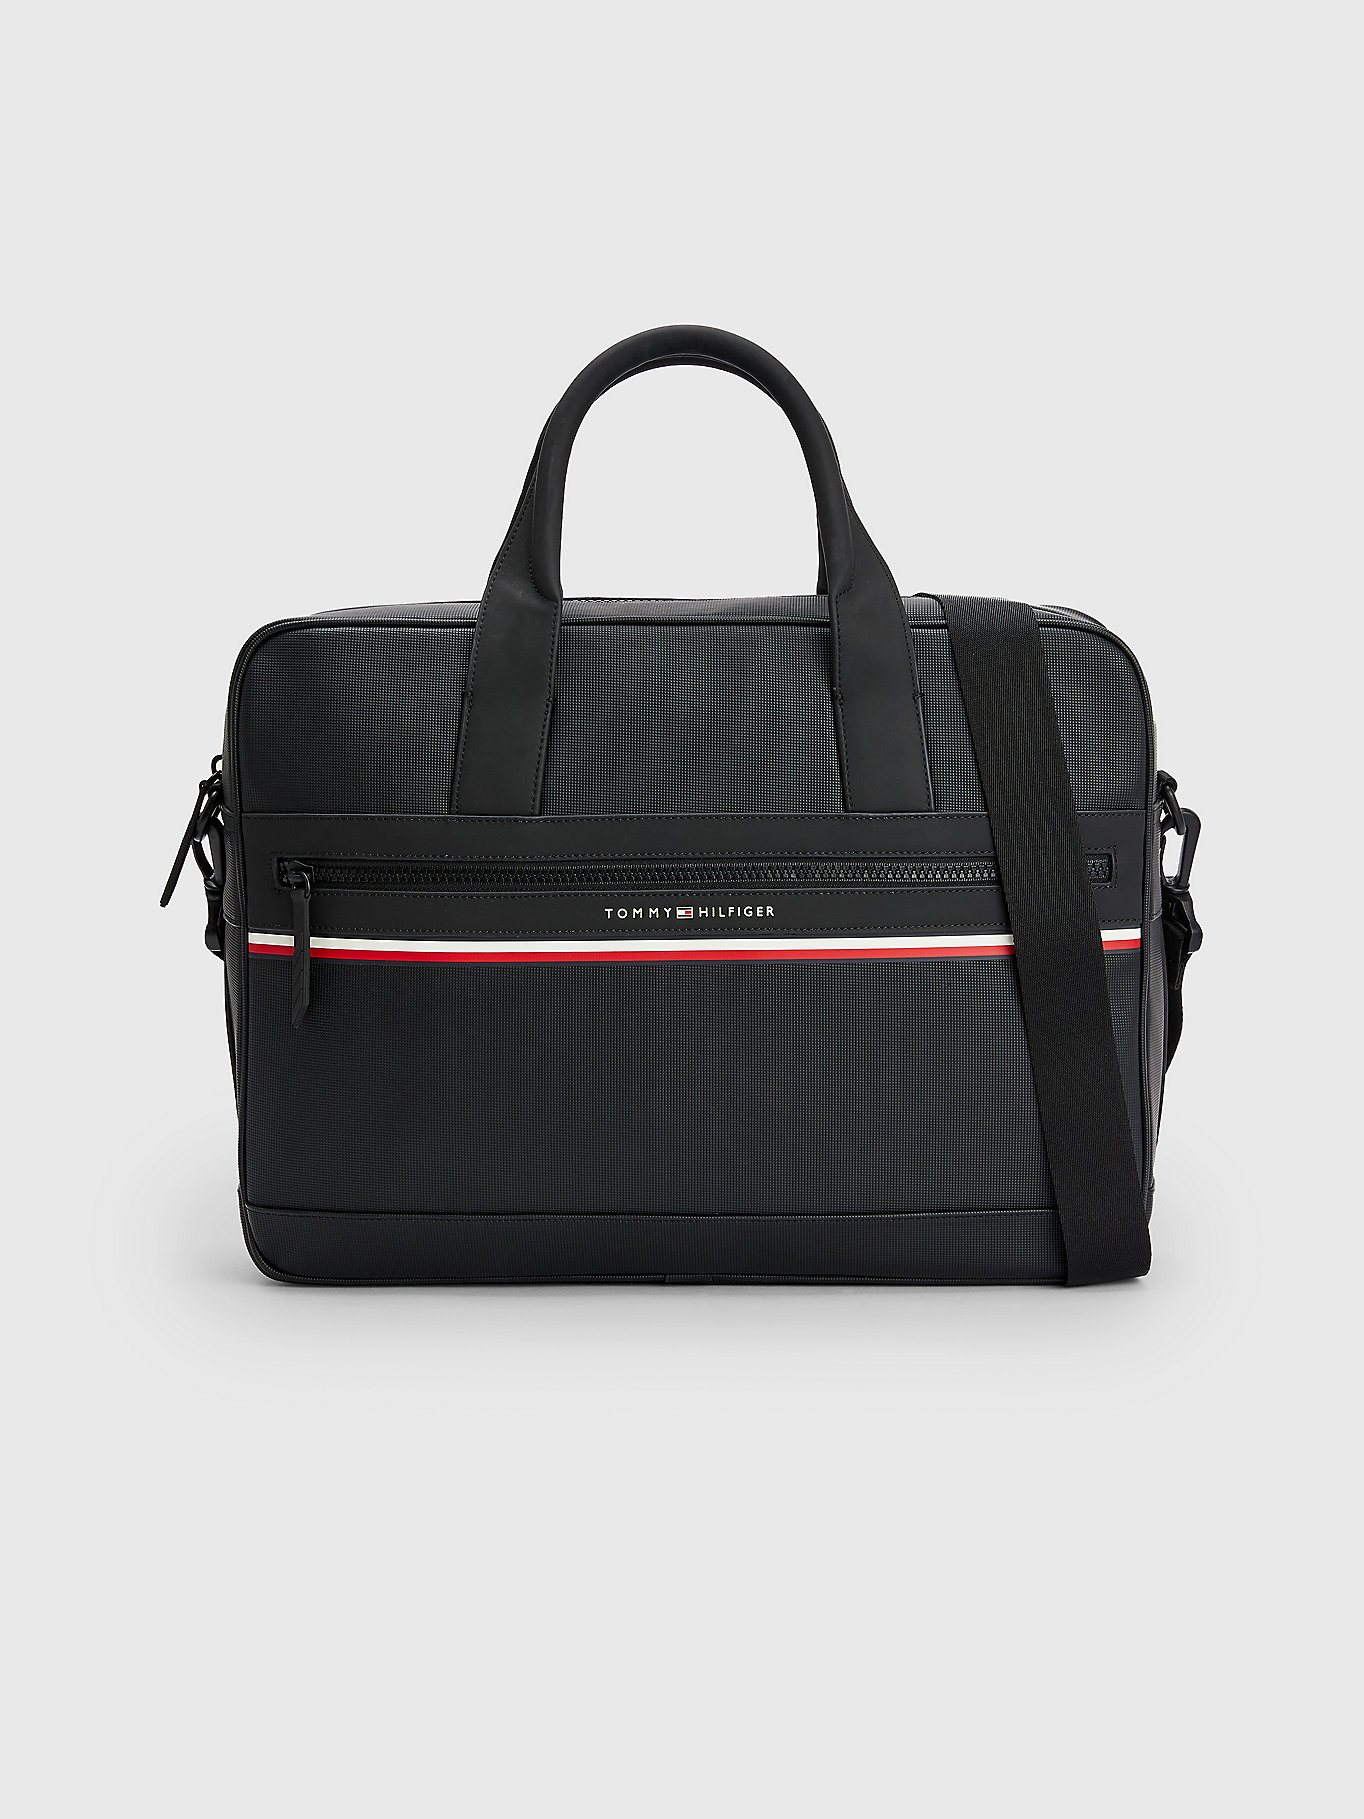 TOMMY HILFIGER COMPUTER BAG | Morans Menswear and Clothing, Thurles, Co ...